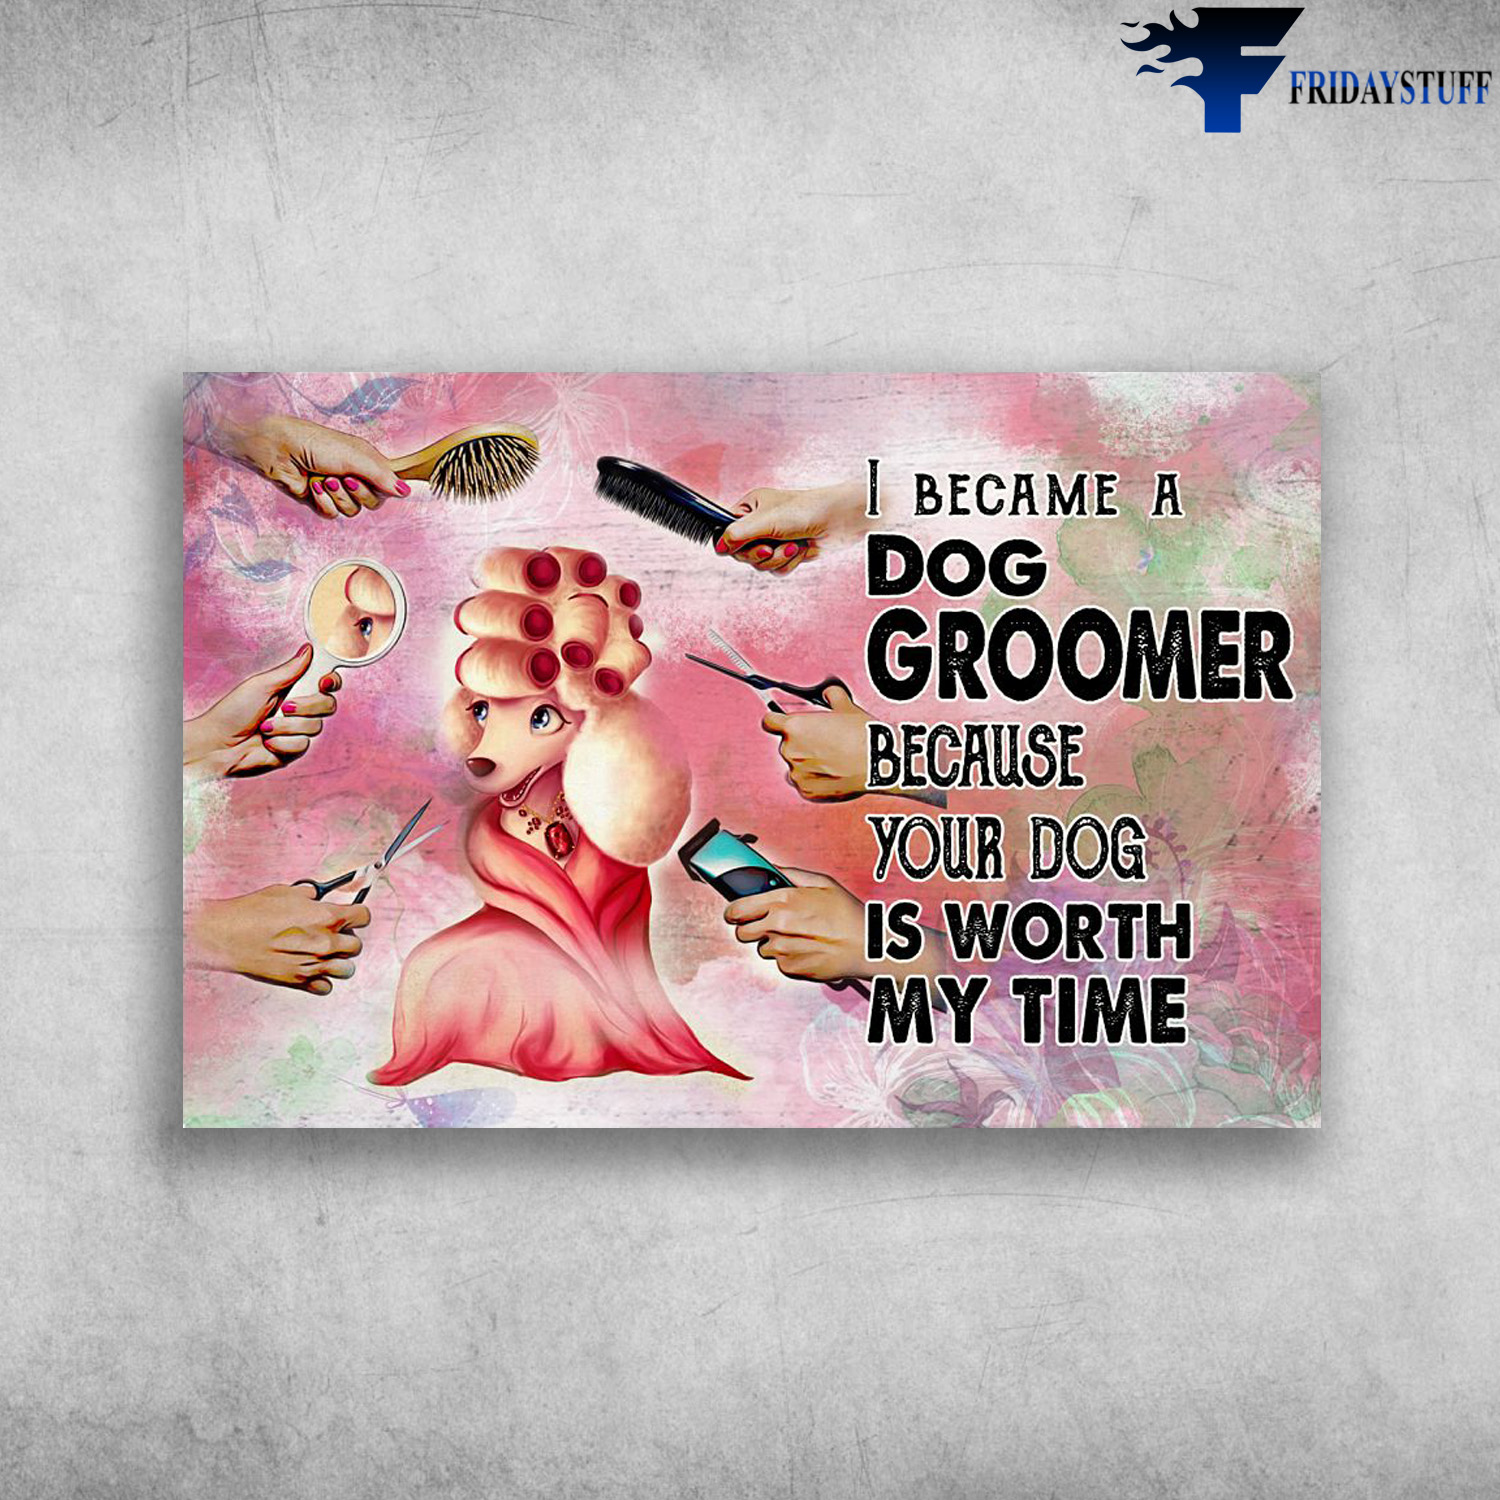 Dog Groomer - I Became A Dog Groomer, Because Your Dog Is Worth My Time